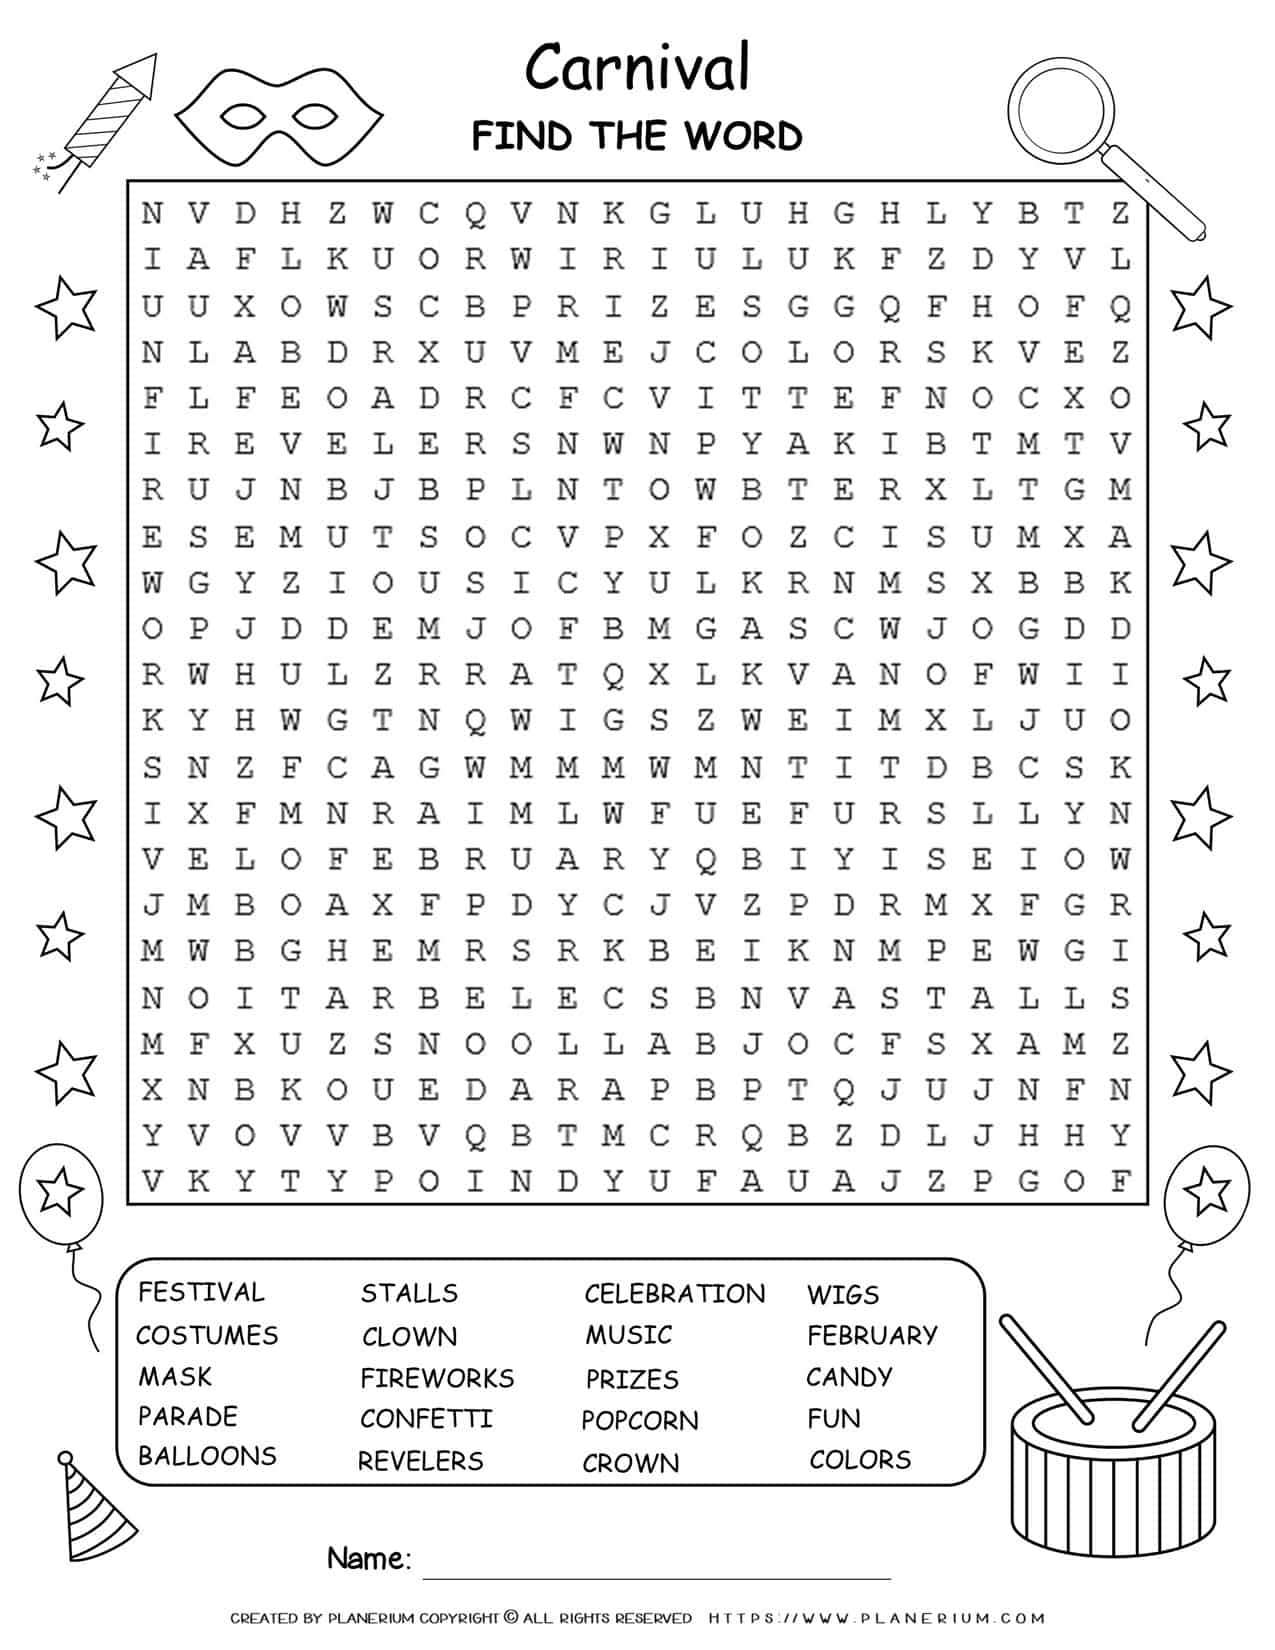 Carnival Word Search Puzzle | Planerium